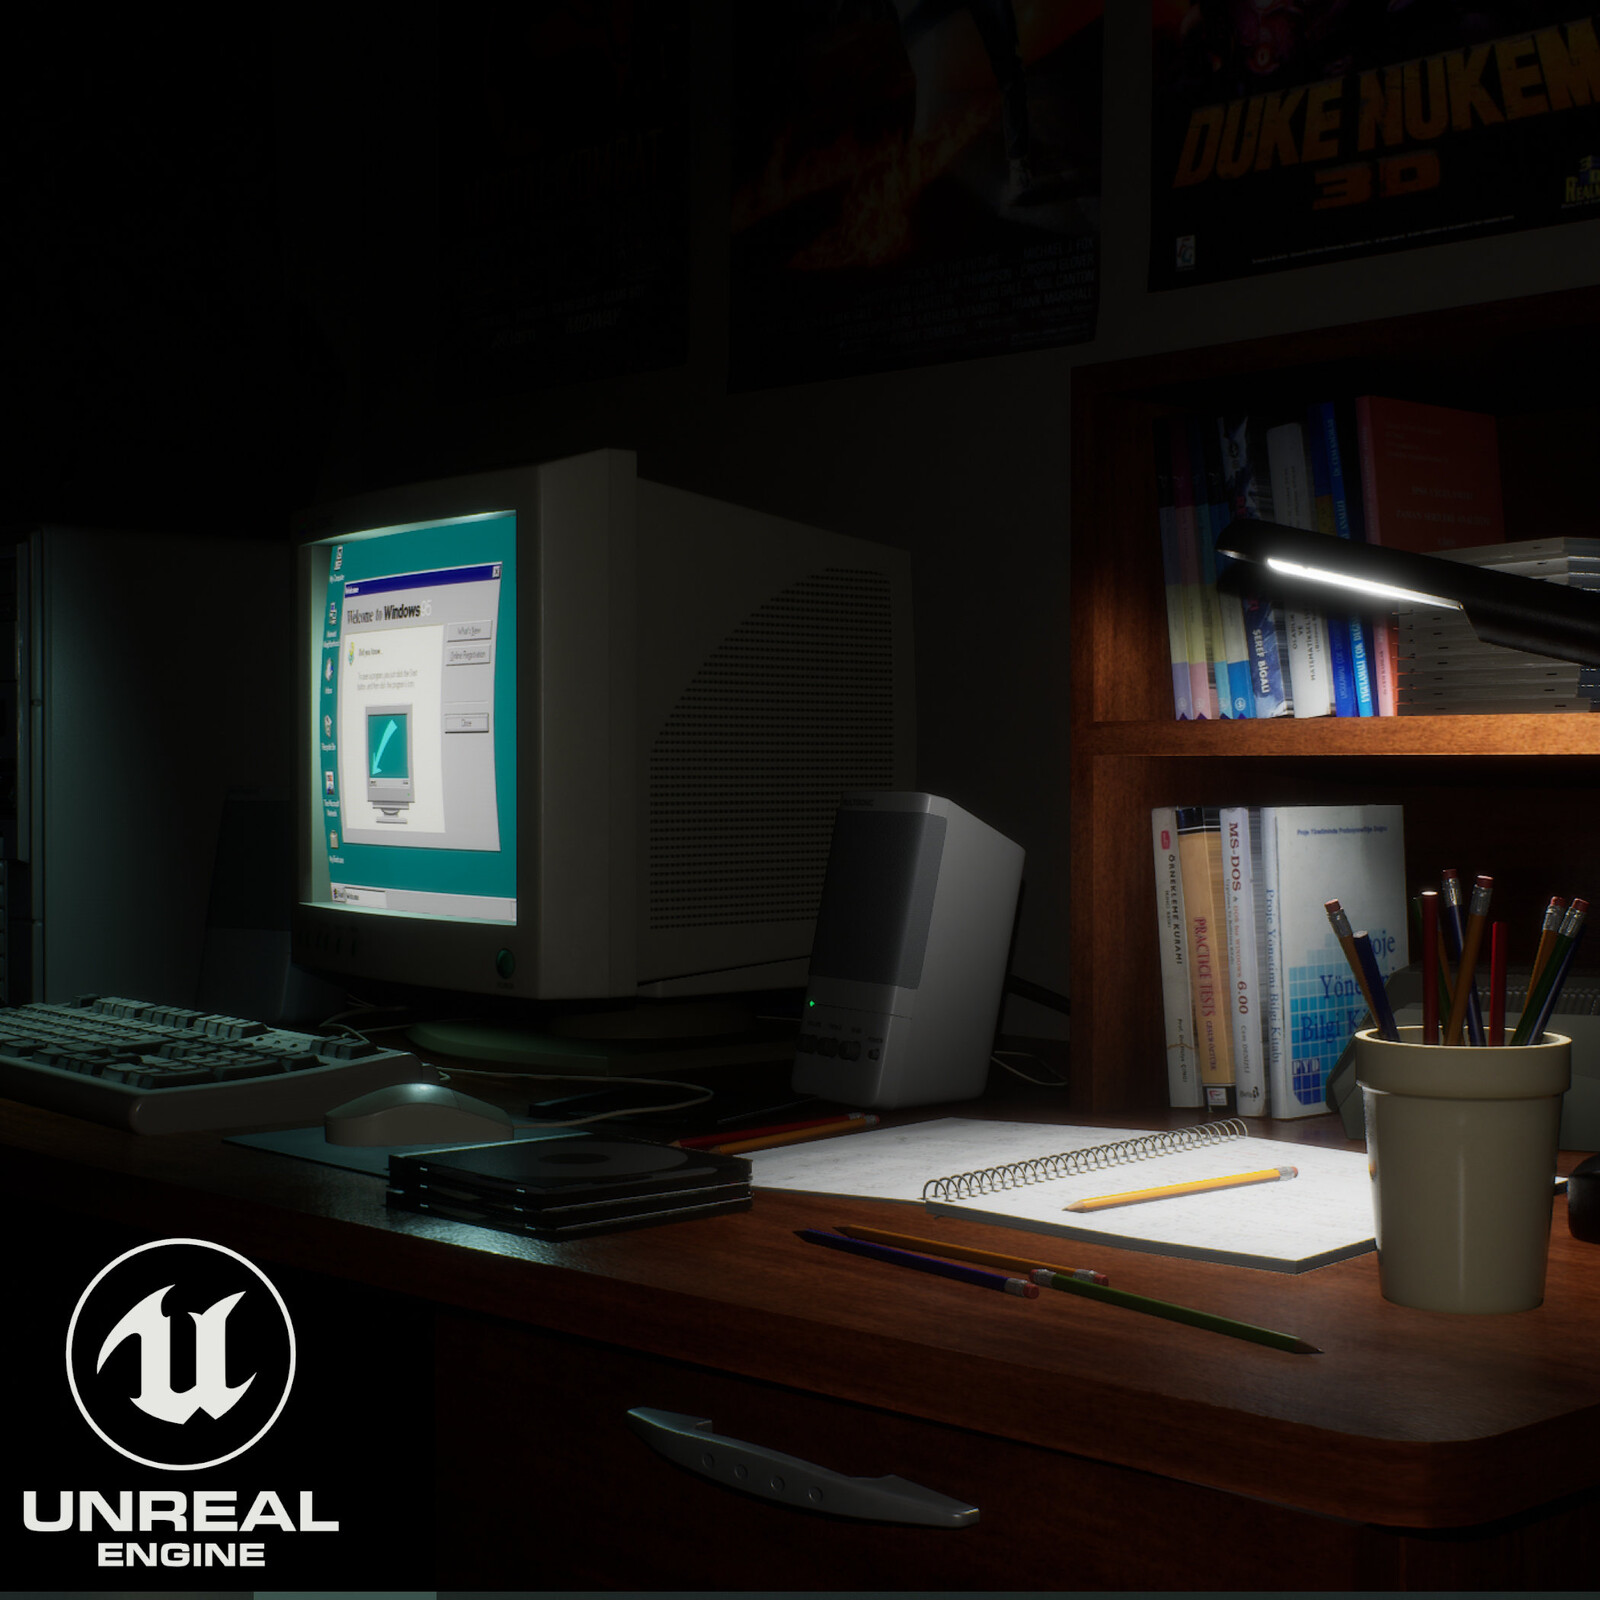 Scene from 90s - Unreal Engine Version